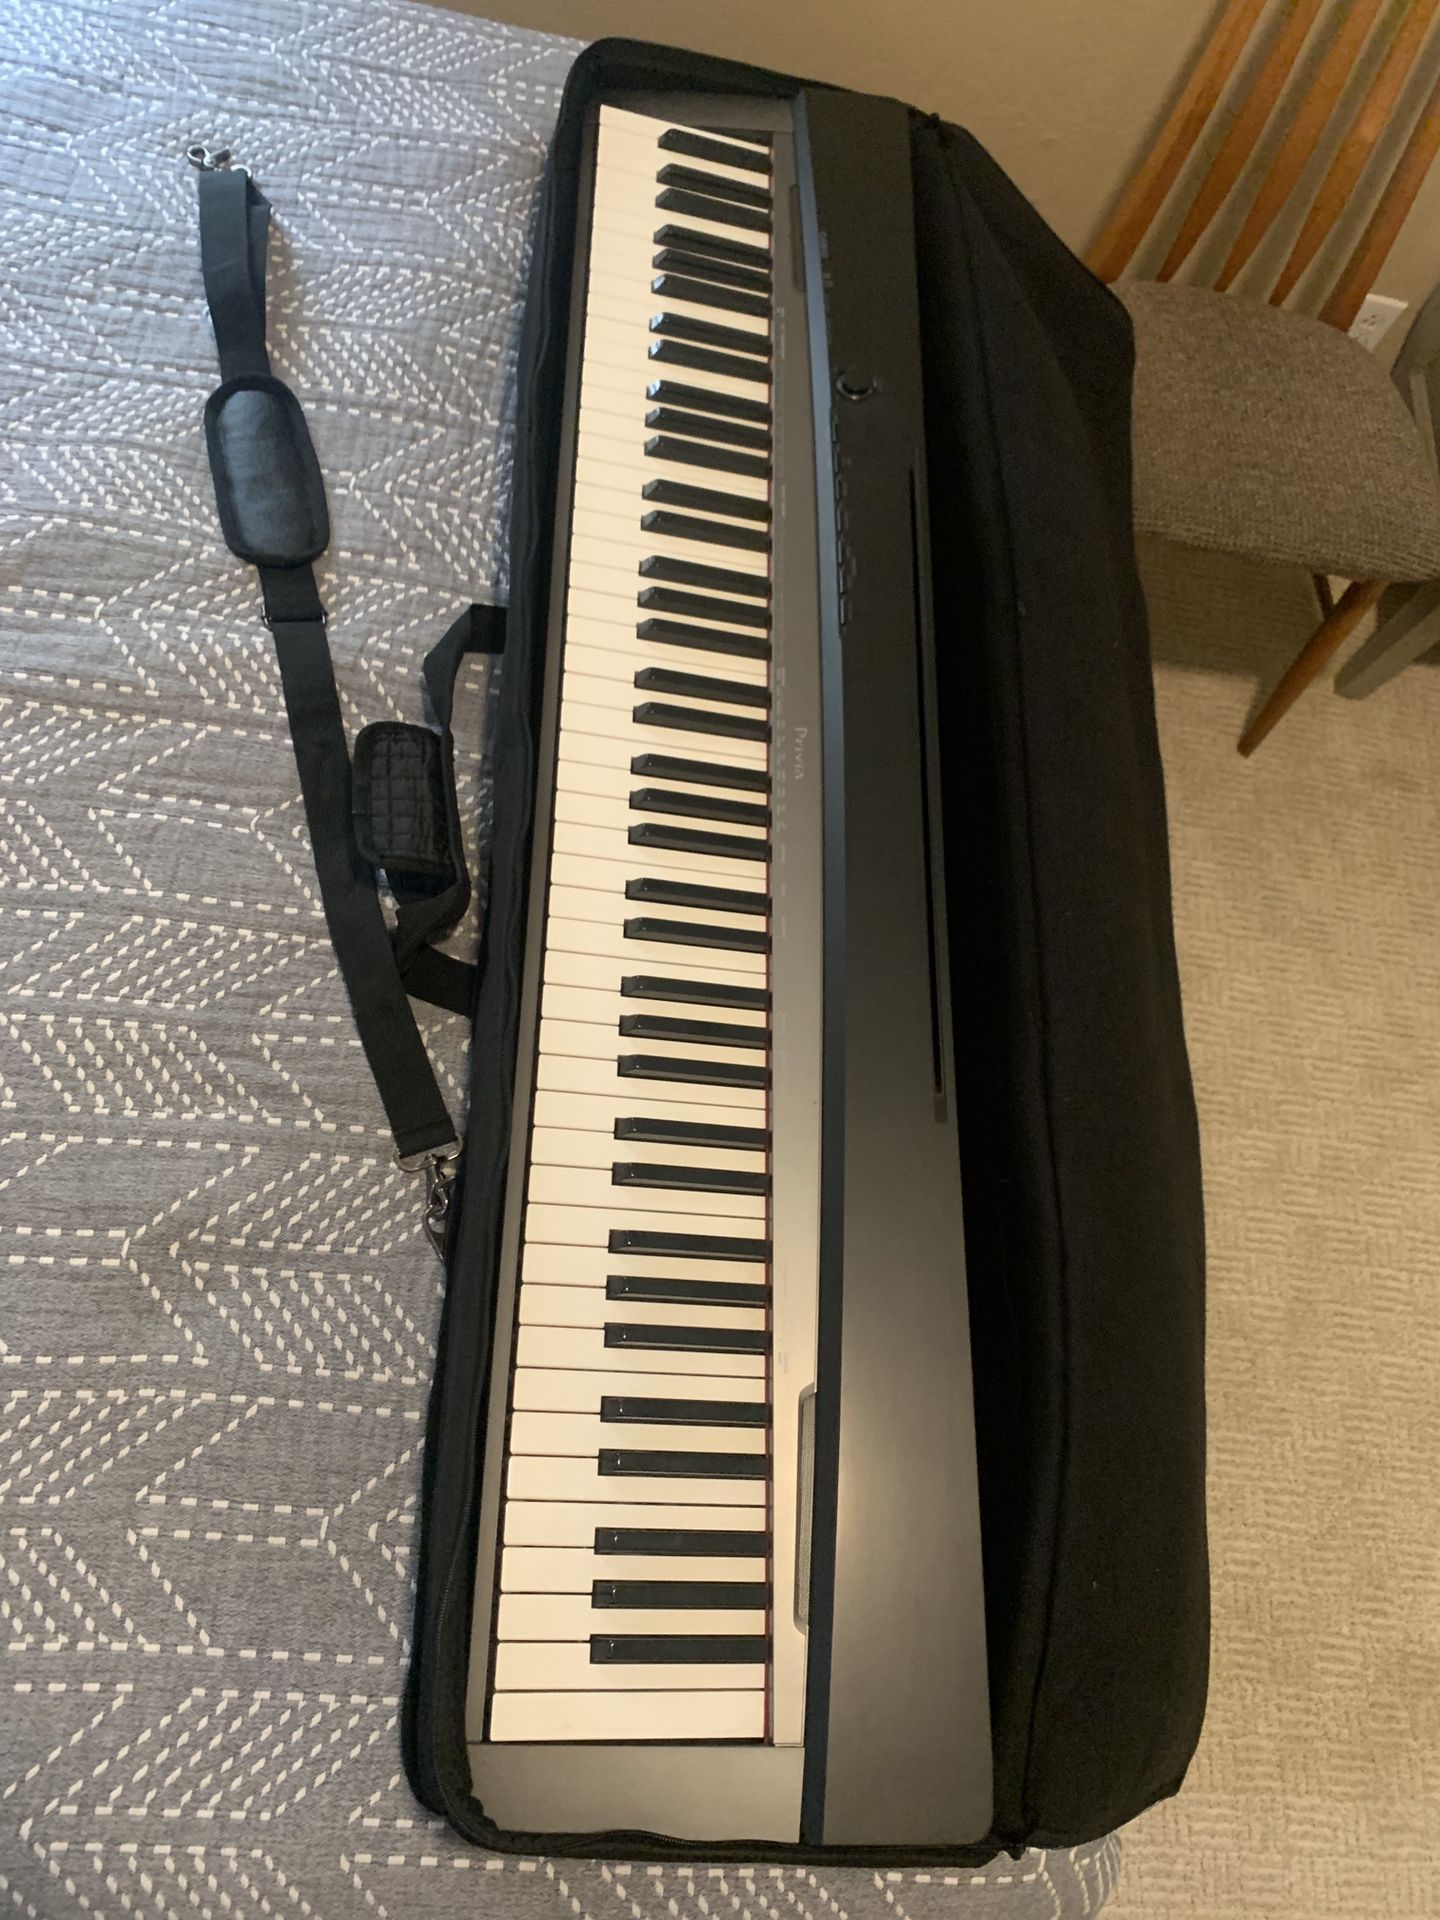 Casio Privia PX-130 Digital Piano with Matching Stand